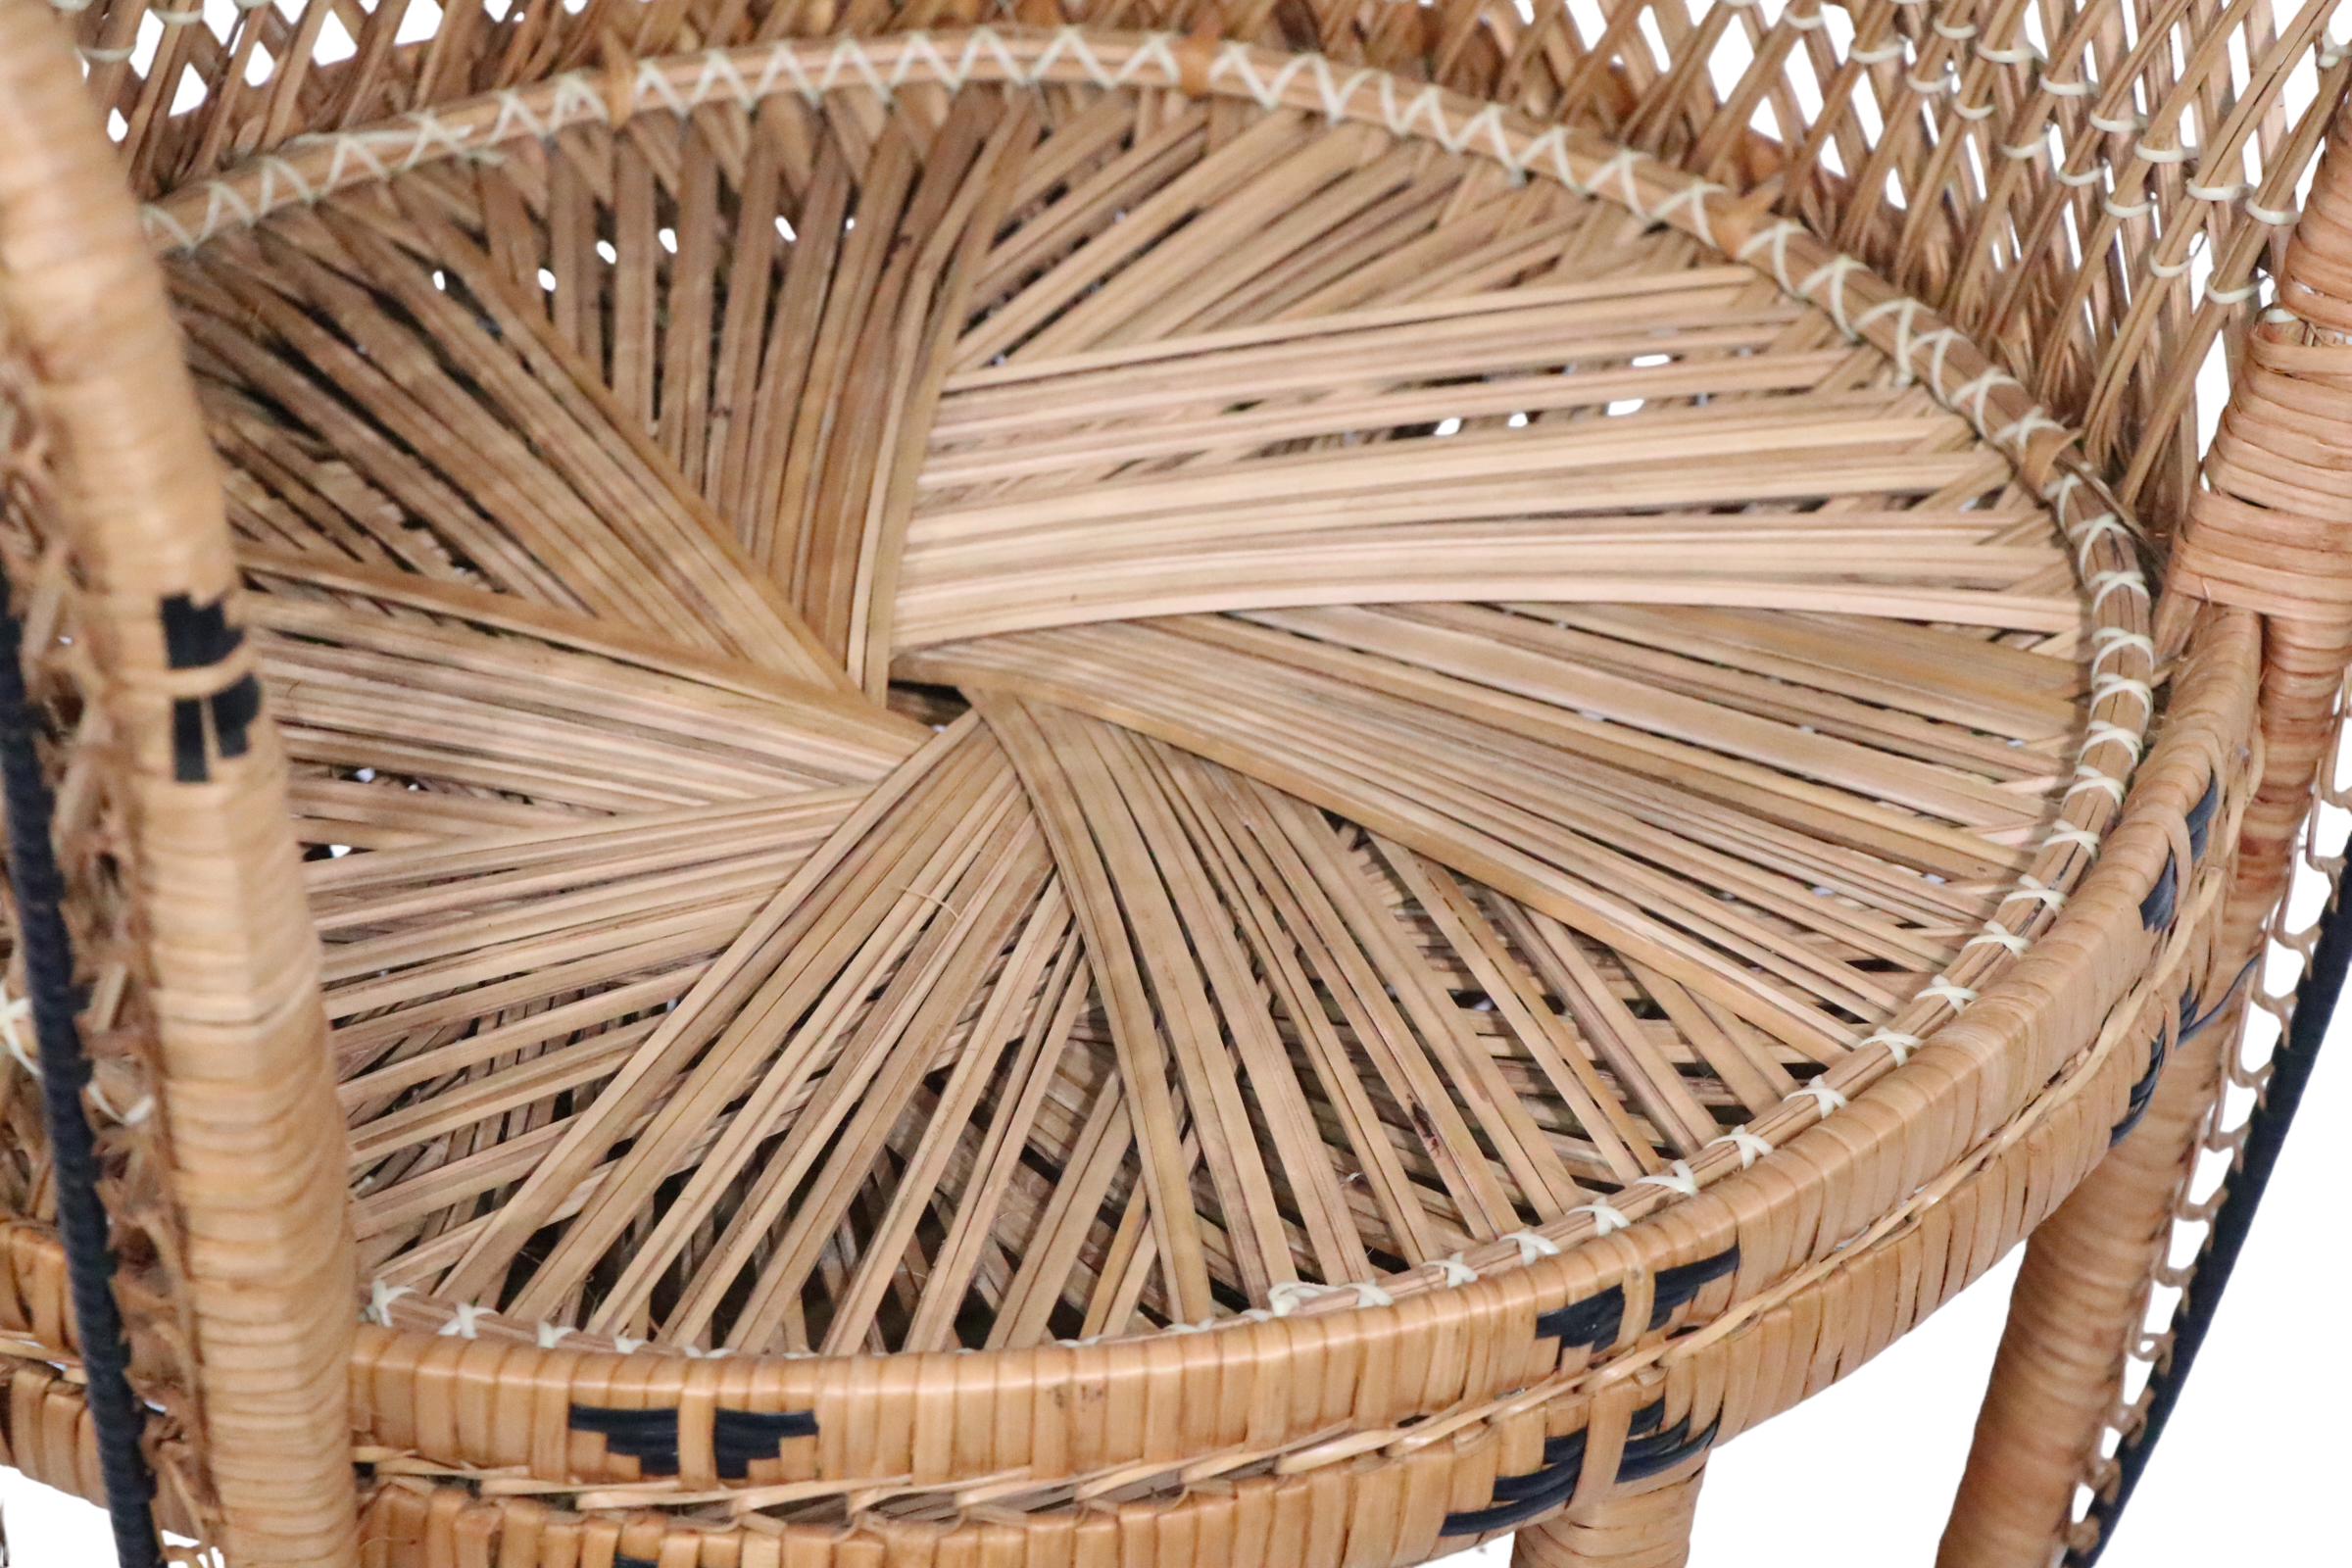 Classic 1960/1970's wicker, rattan Emmanuelle, or Peacock chair, in very good, original, clean and ready to use condition, showing only light wear, normal and consistent with age. 